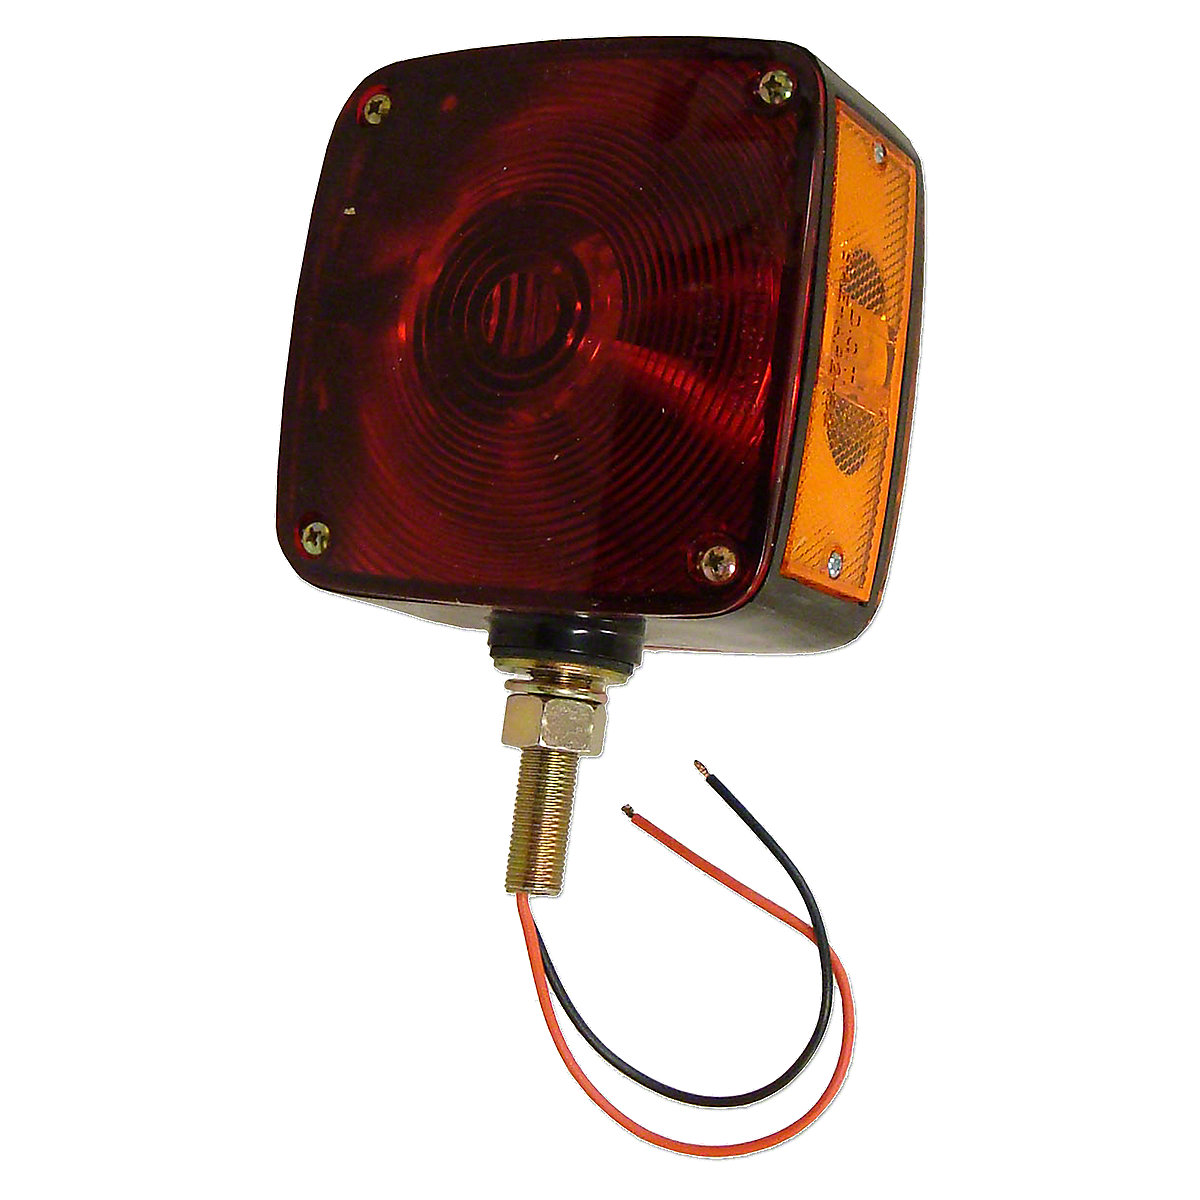 Rectangular Fender And Cab Mount Warning Light For Allis Chalmers Tractors.